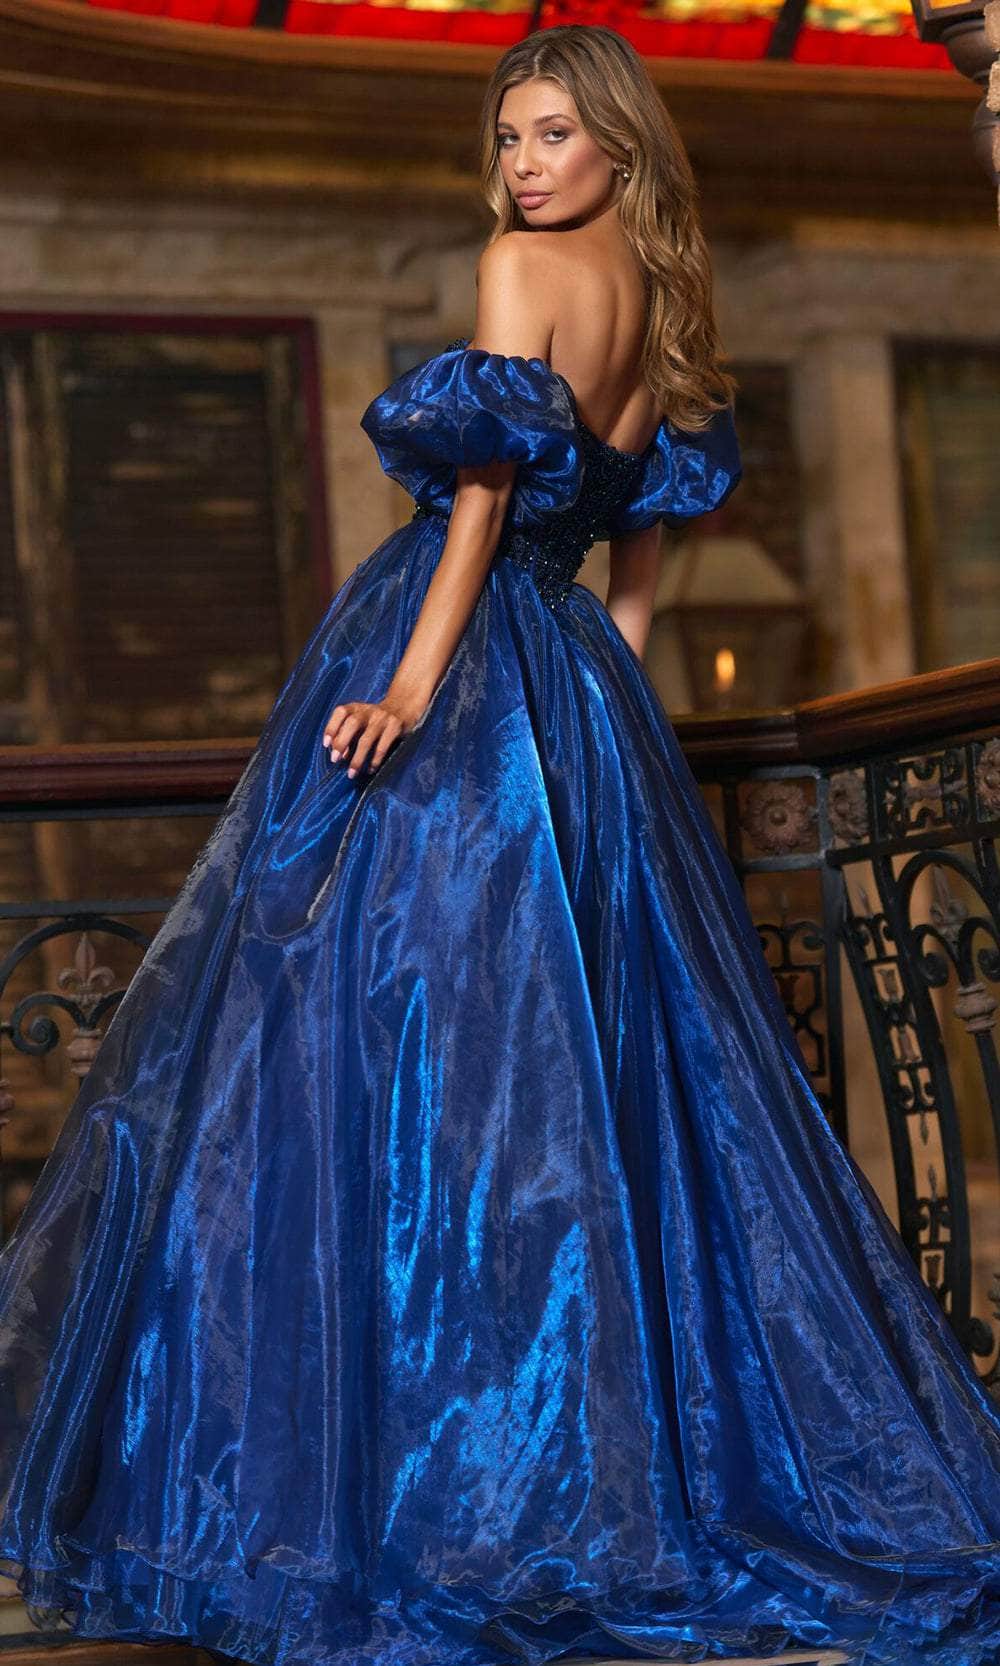 Lady Shiny Mesh Dress Puff Sleeve Princess Party Evening Prom Ball Gown  Blue | eBay